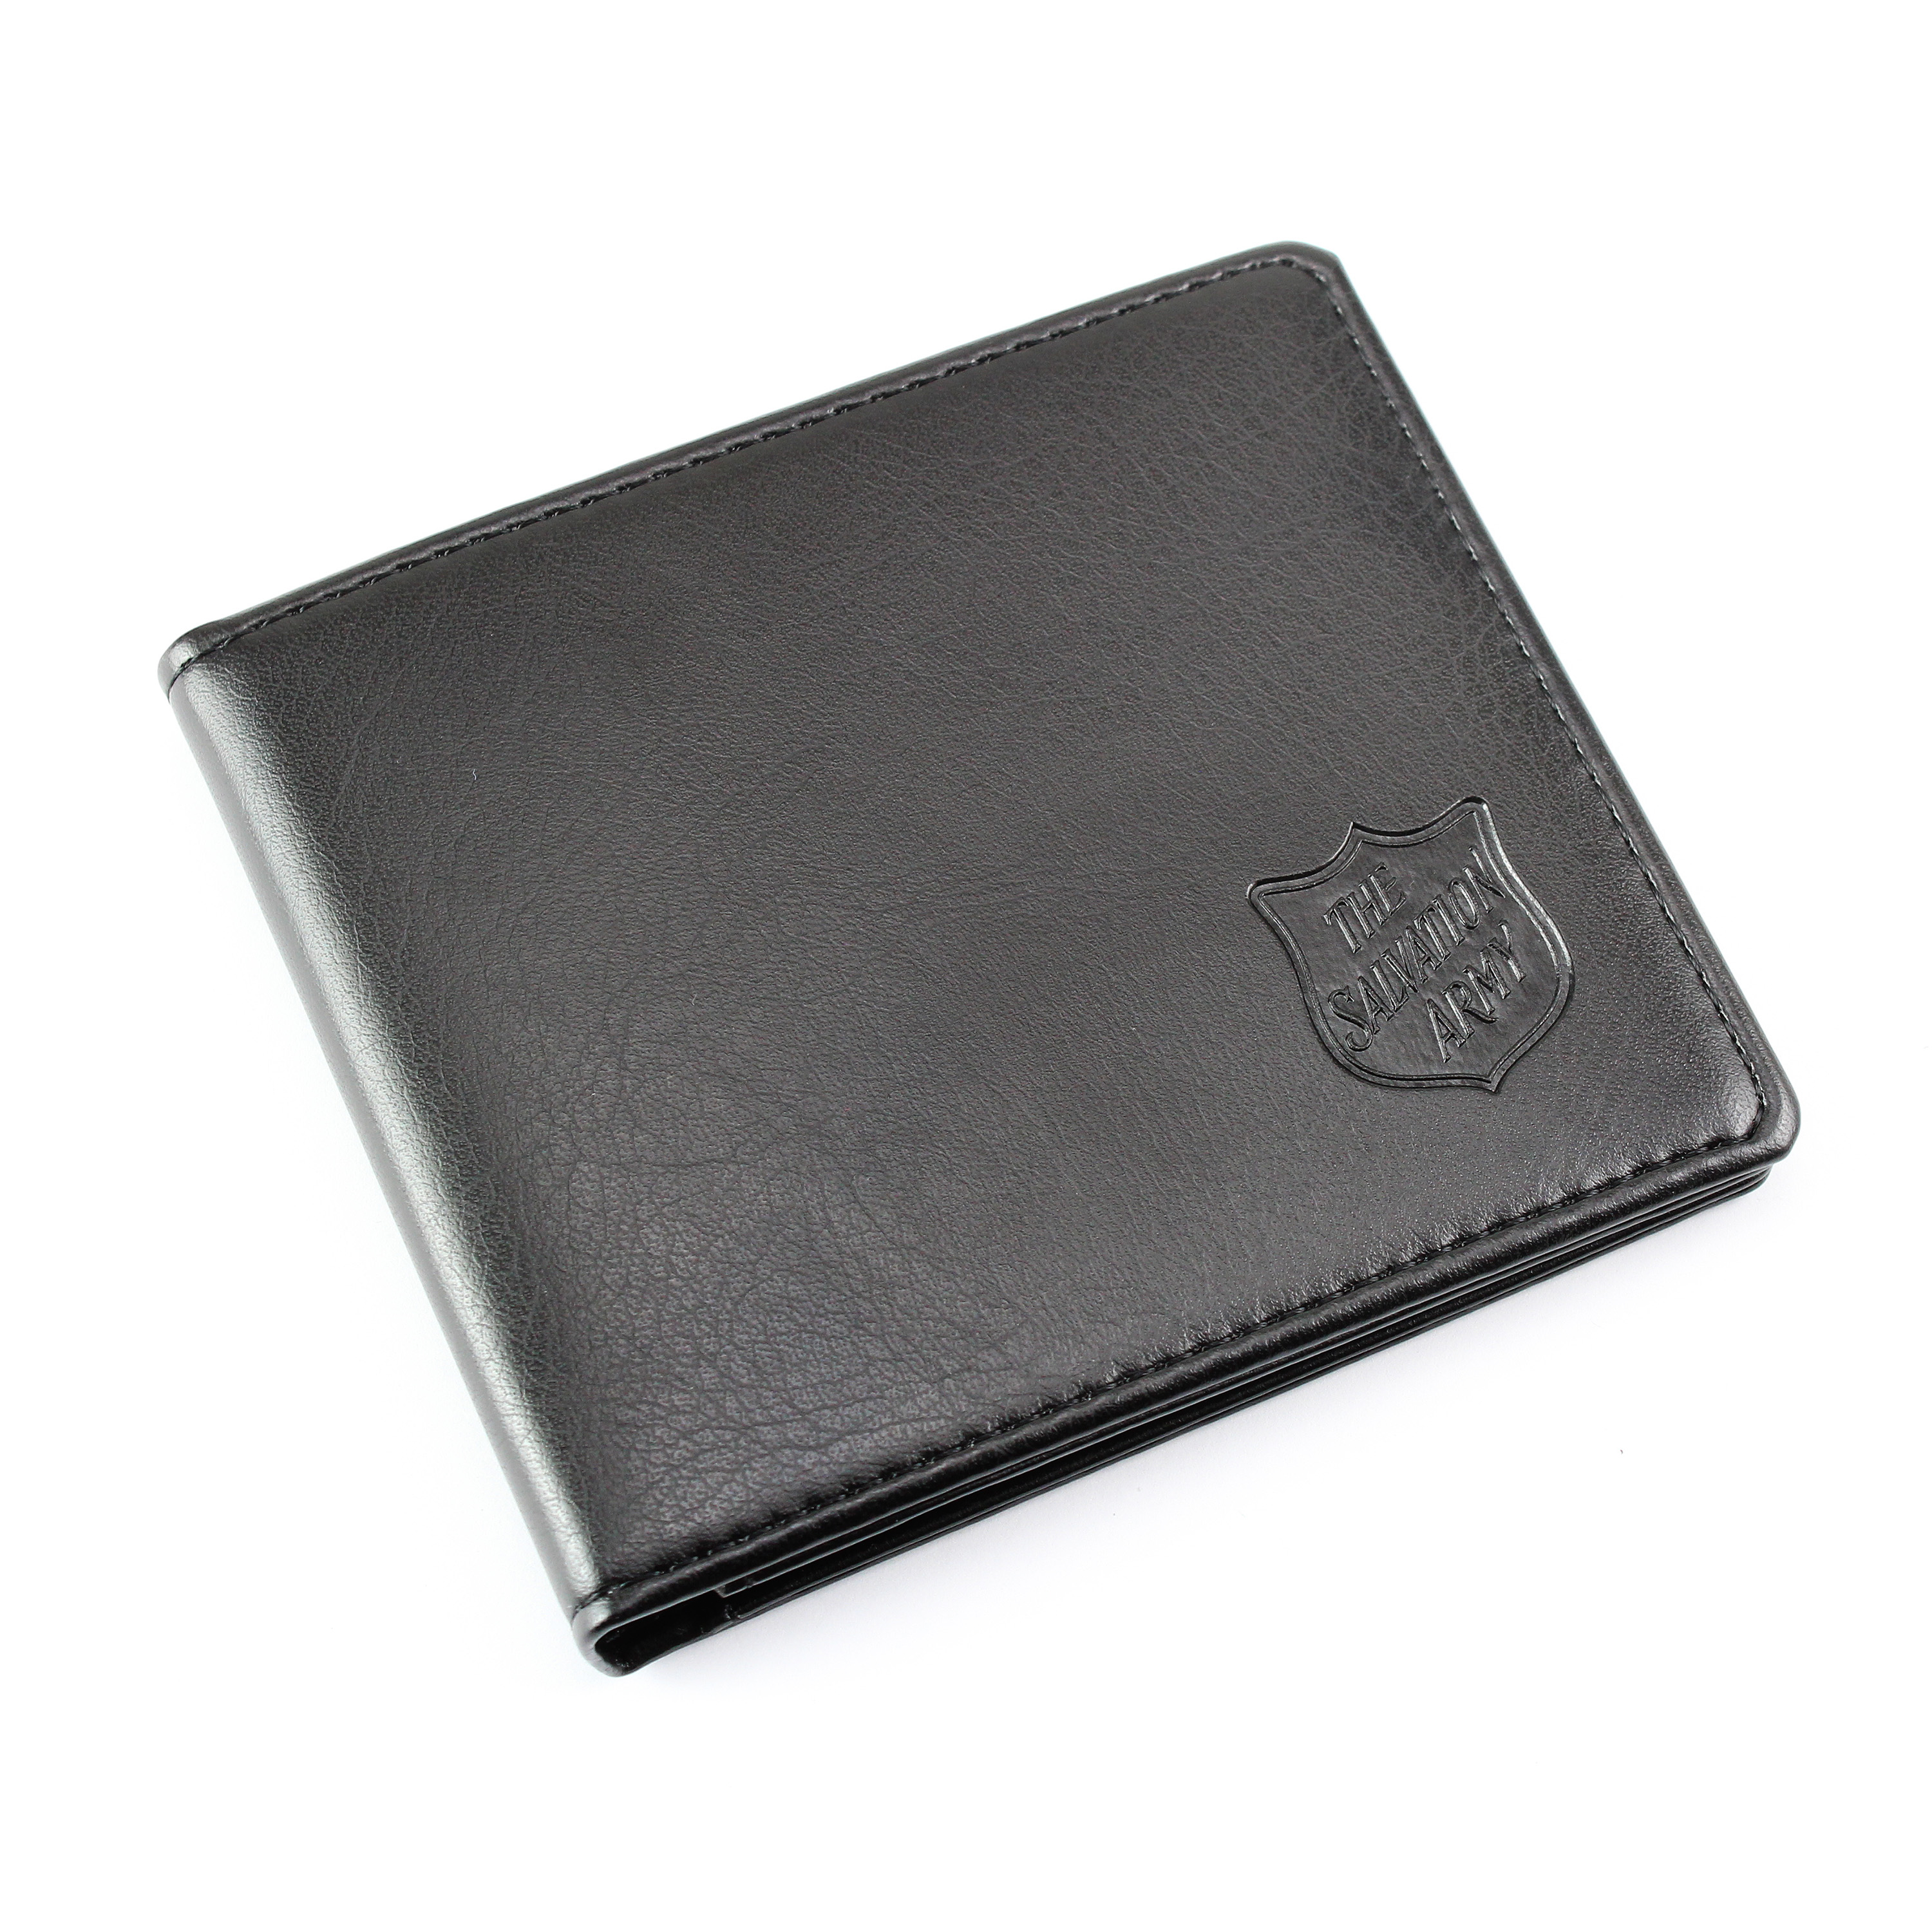 https://www.sps-shop.com/user/products/large/Salvation%20Army%20Wallet%20Front%20Angled.jpg